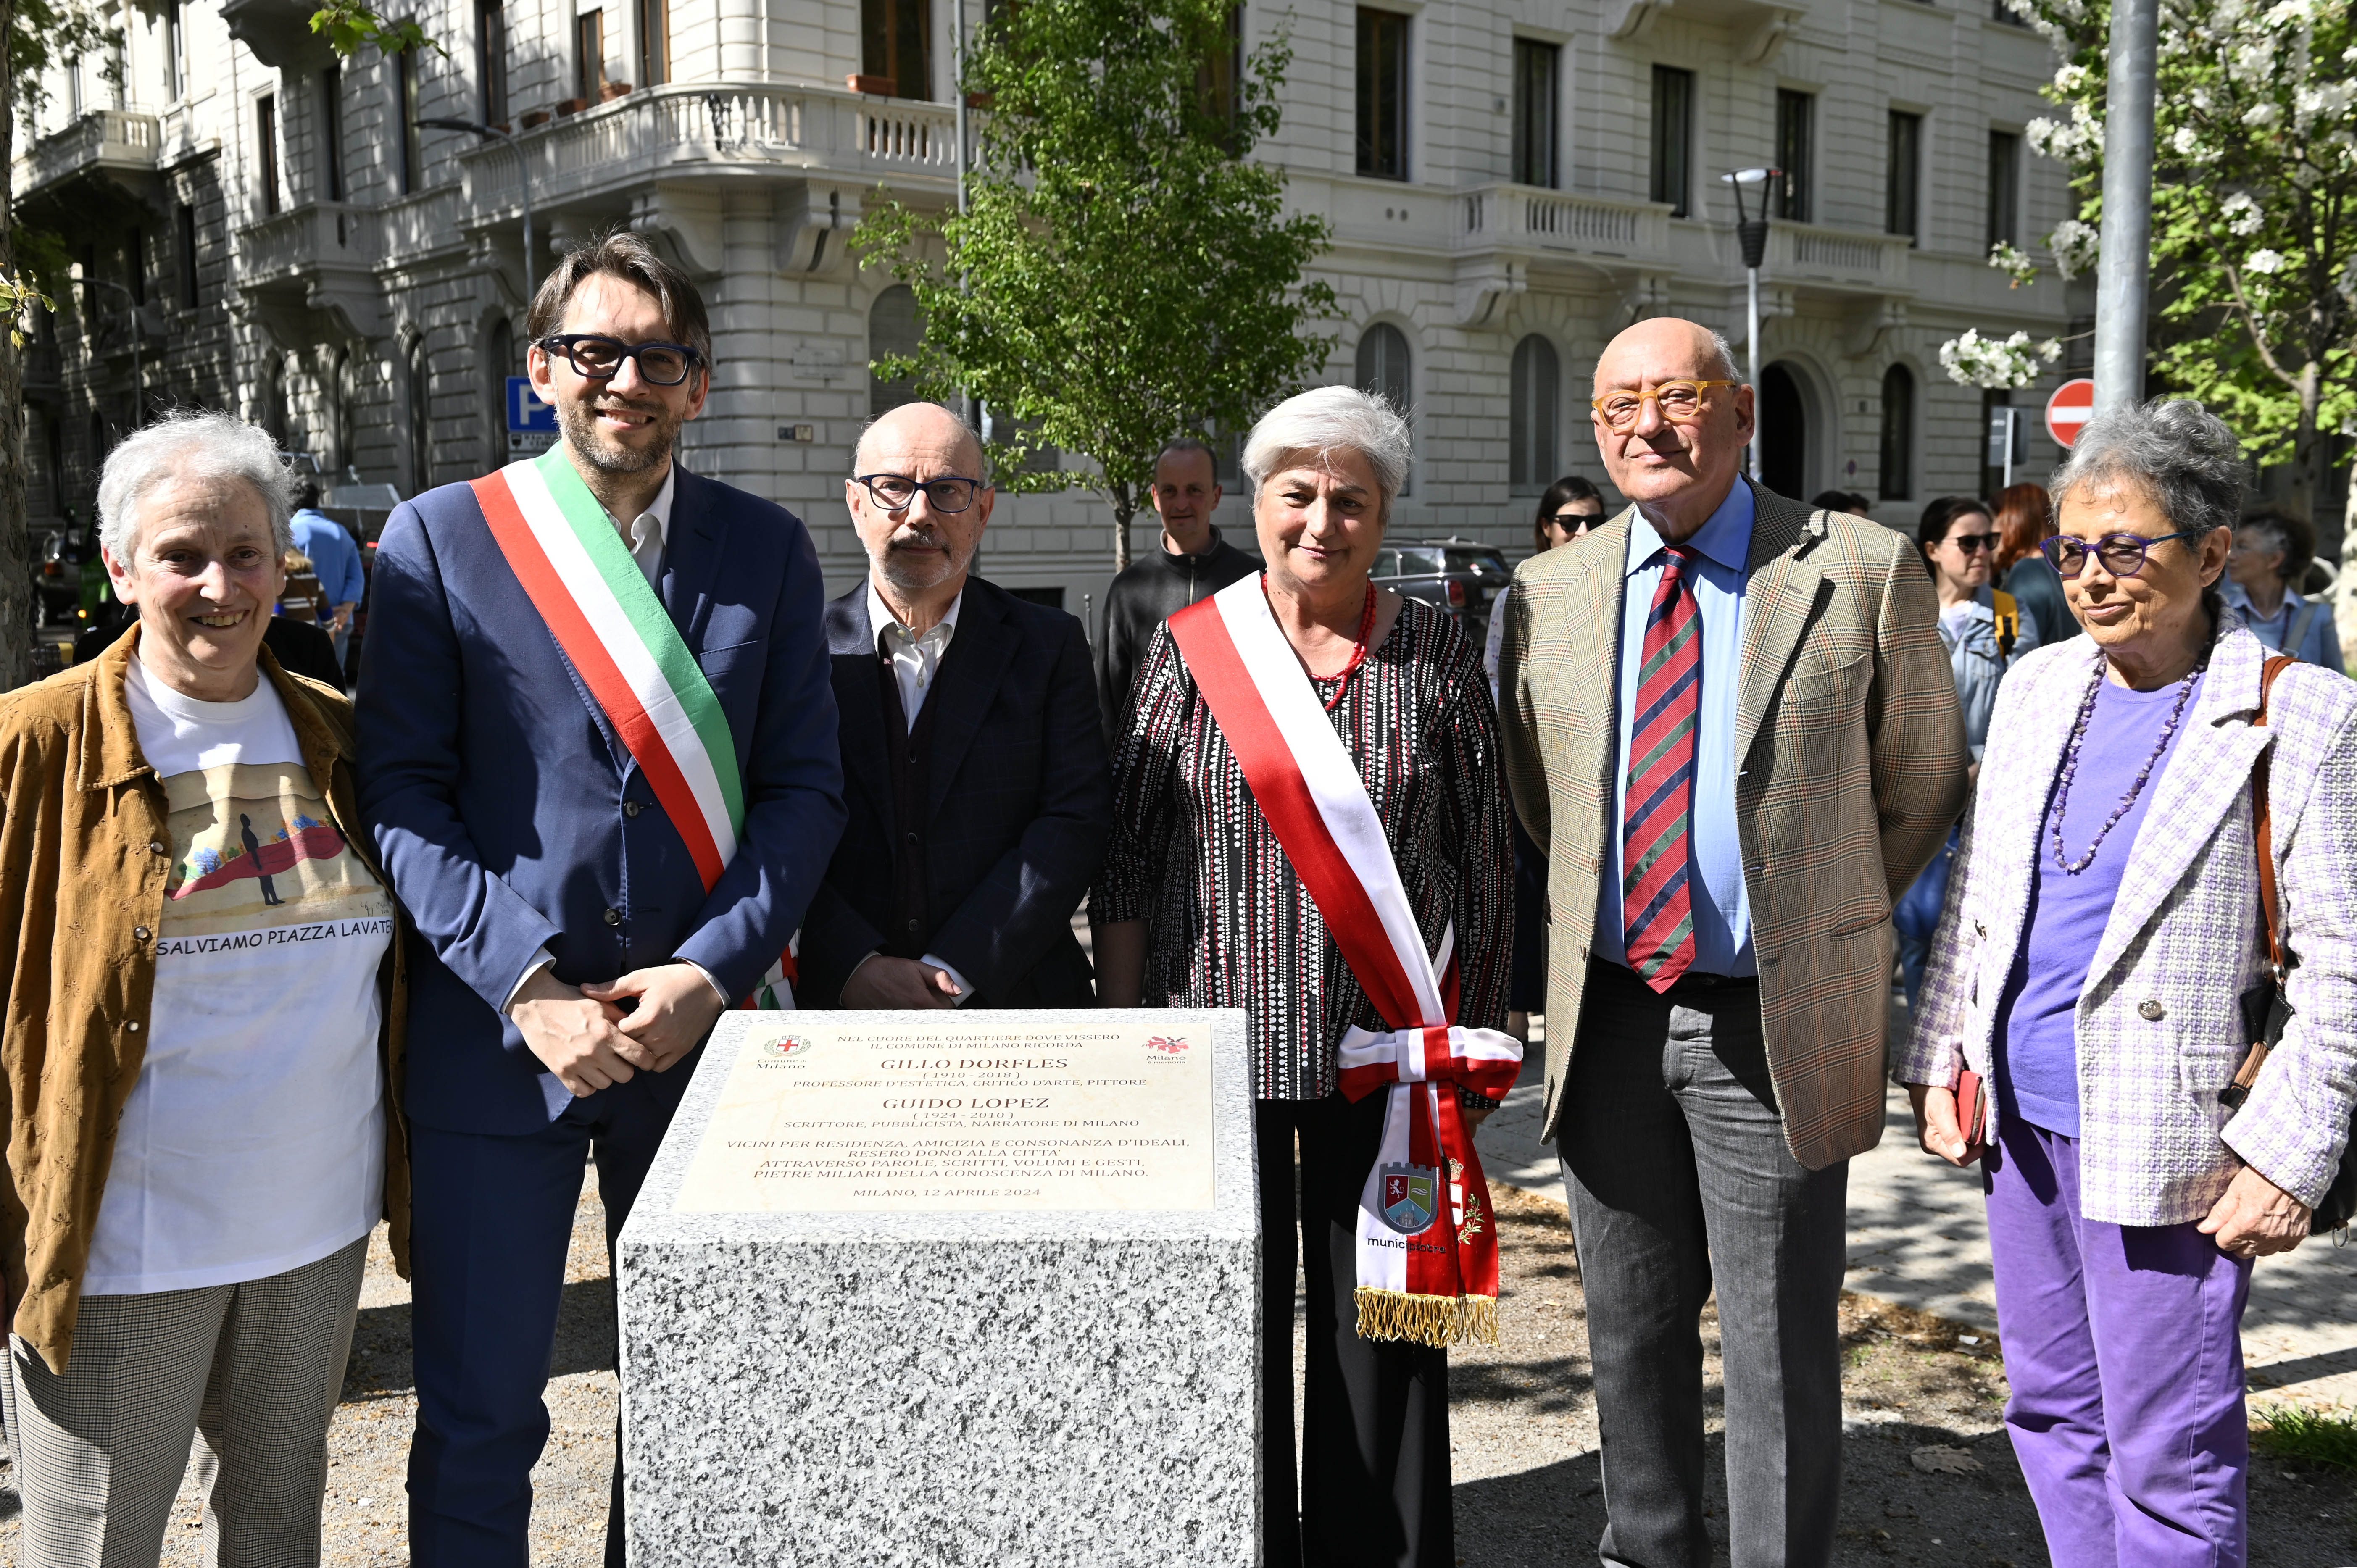 In Piazzale Lavater a plaque commemorates Gillo Dorfles and Guido Lopez, friends and protagonists of Milanese culture